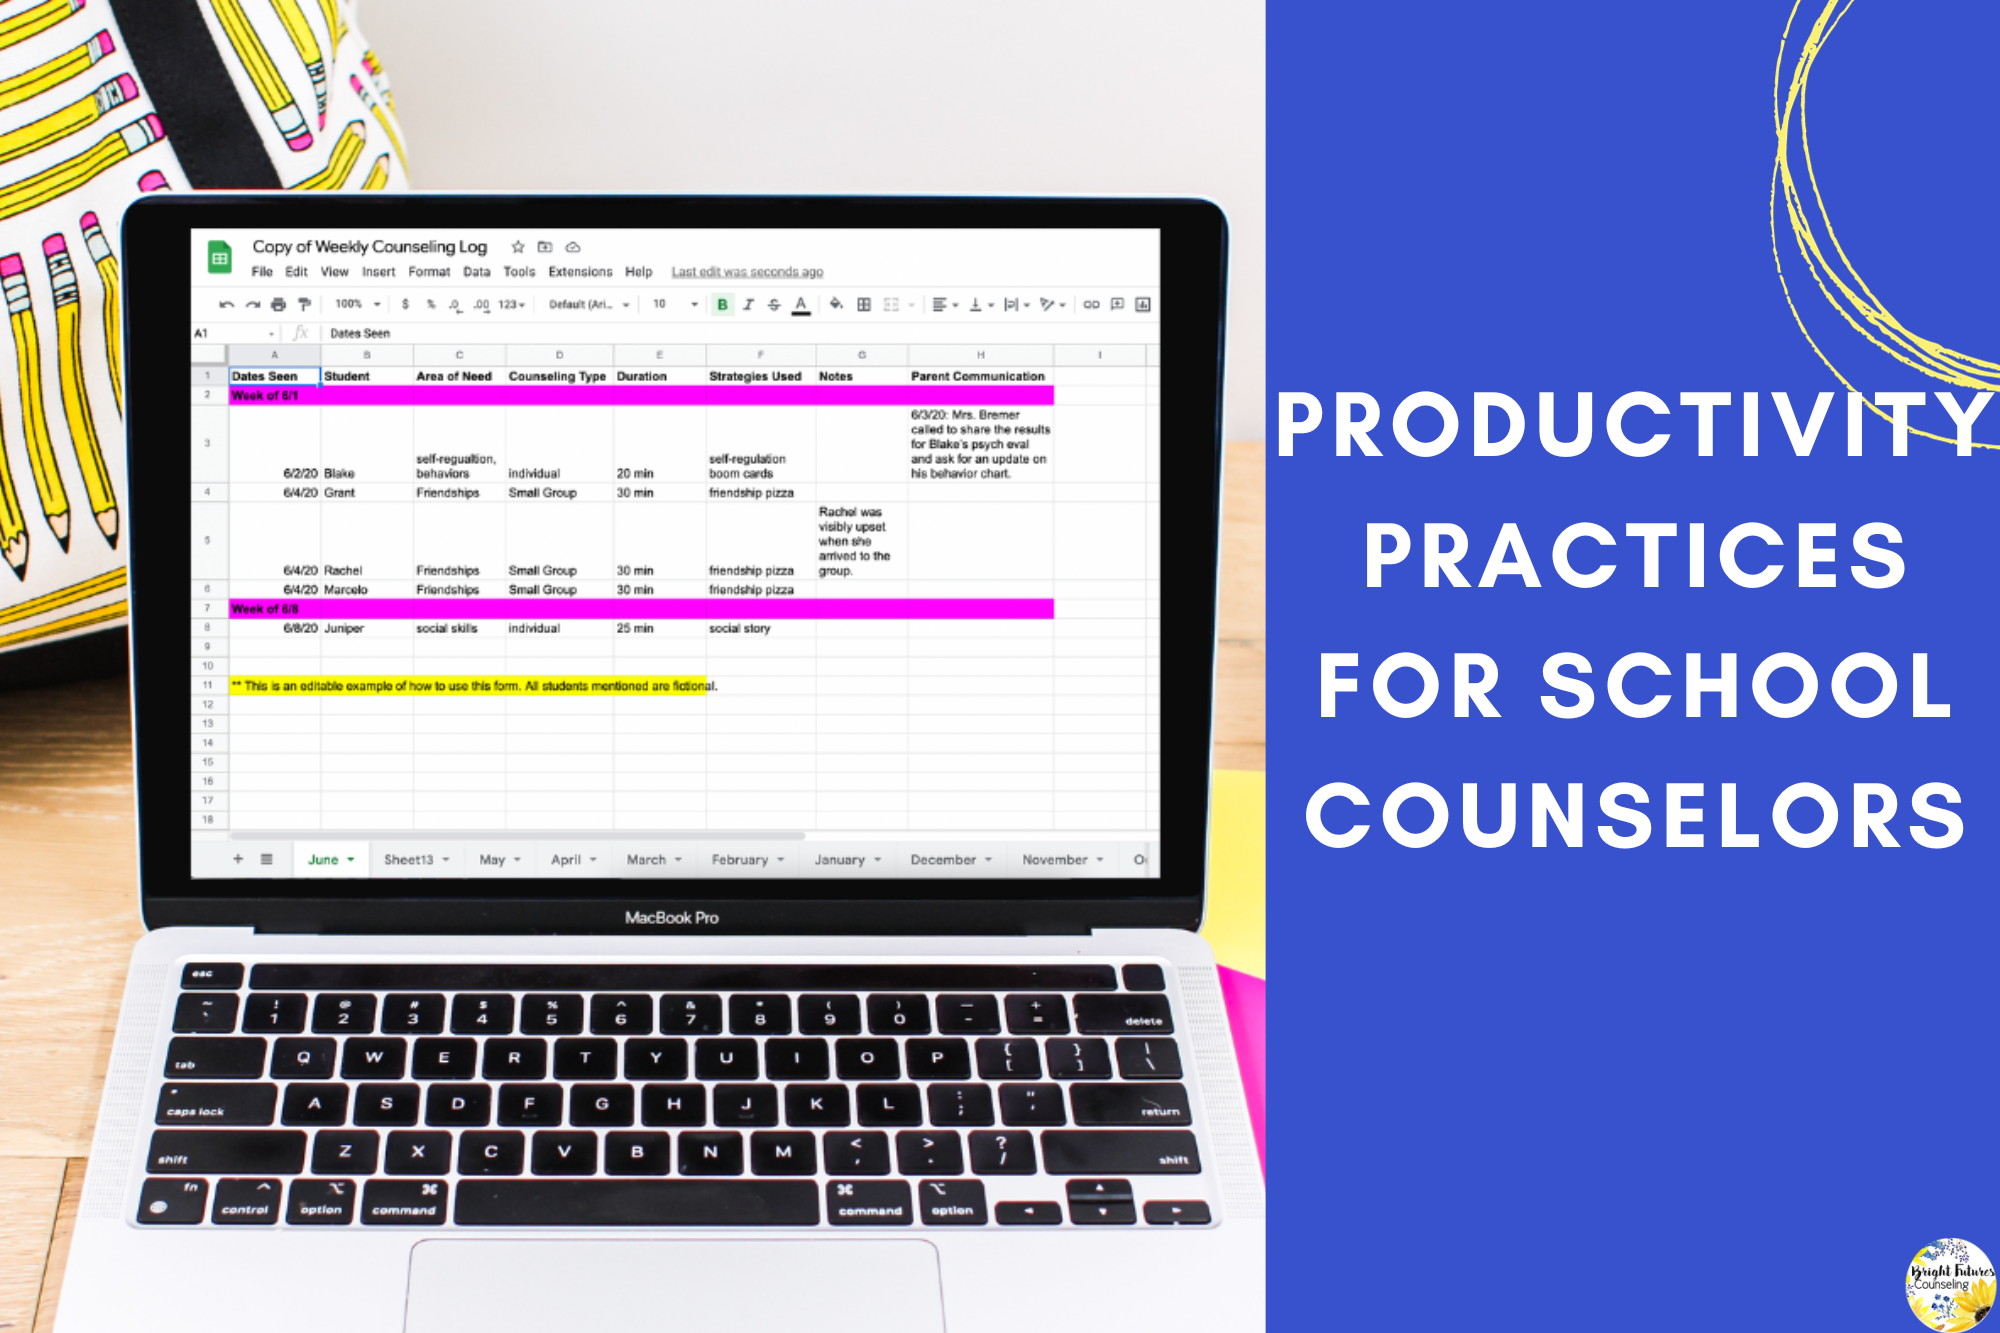 Productivity Practices for School Counselors